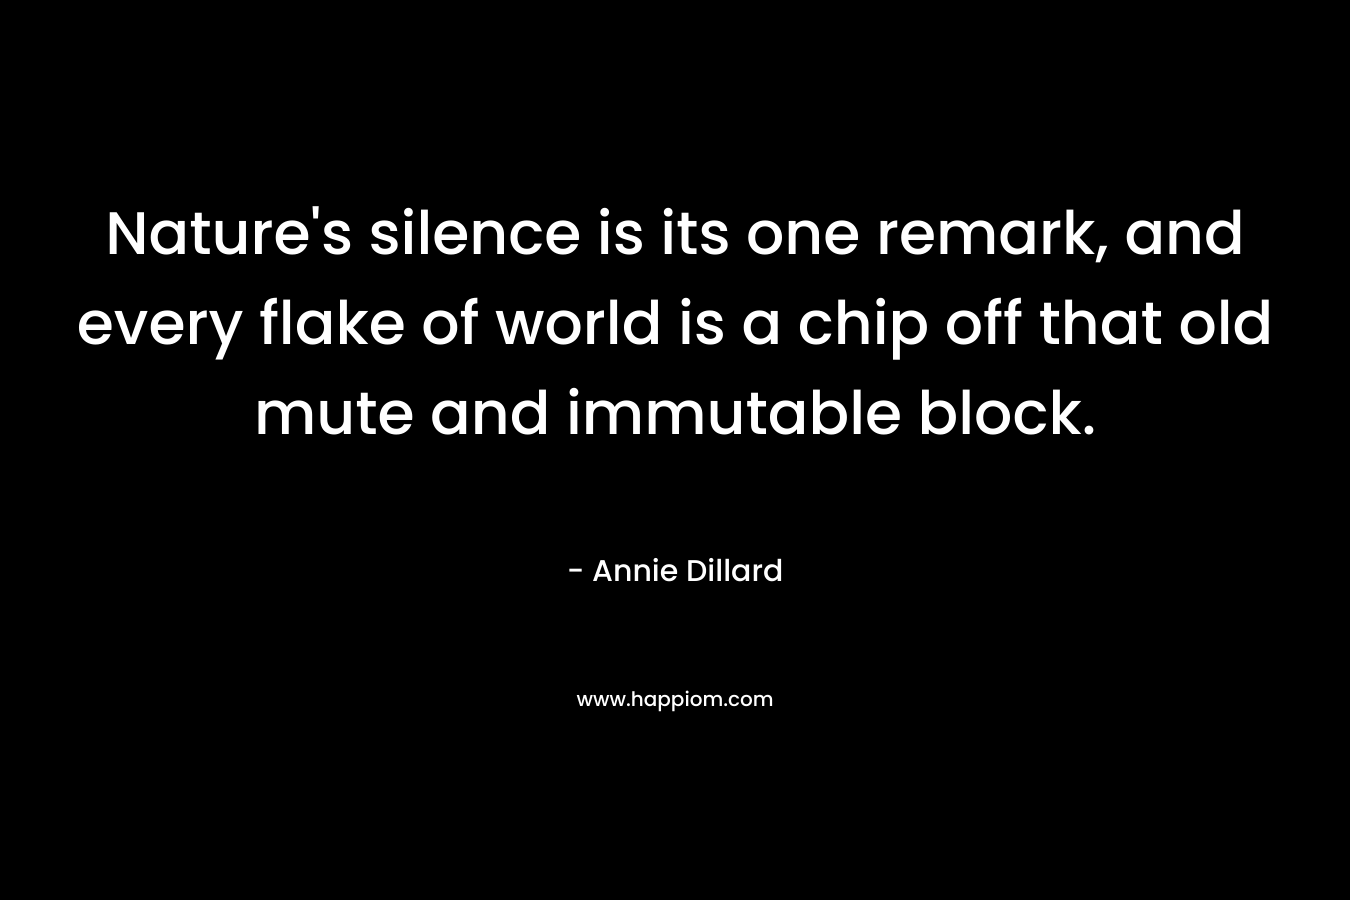 Nature’s silence is its one remark, and every flake of world is a chip off that old mute and immutable block. – Annie Dillard